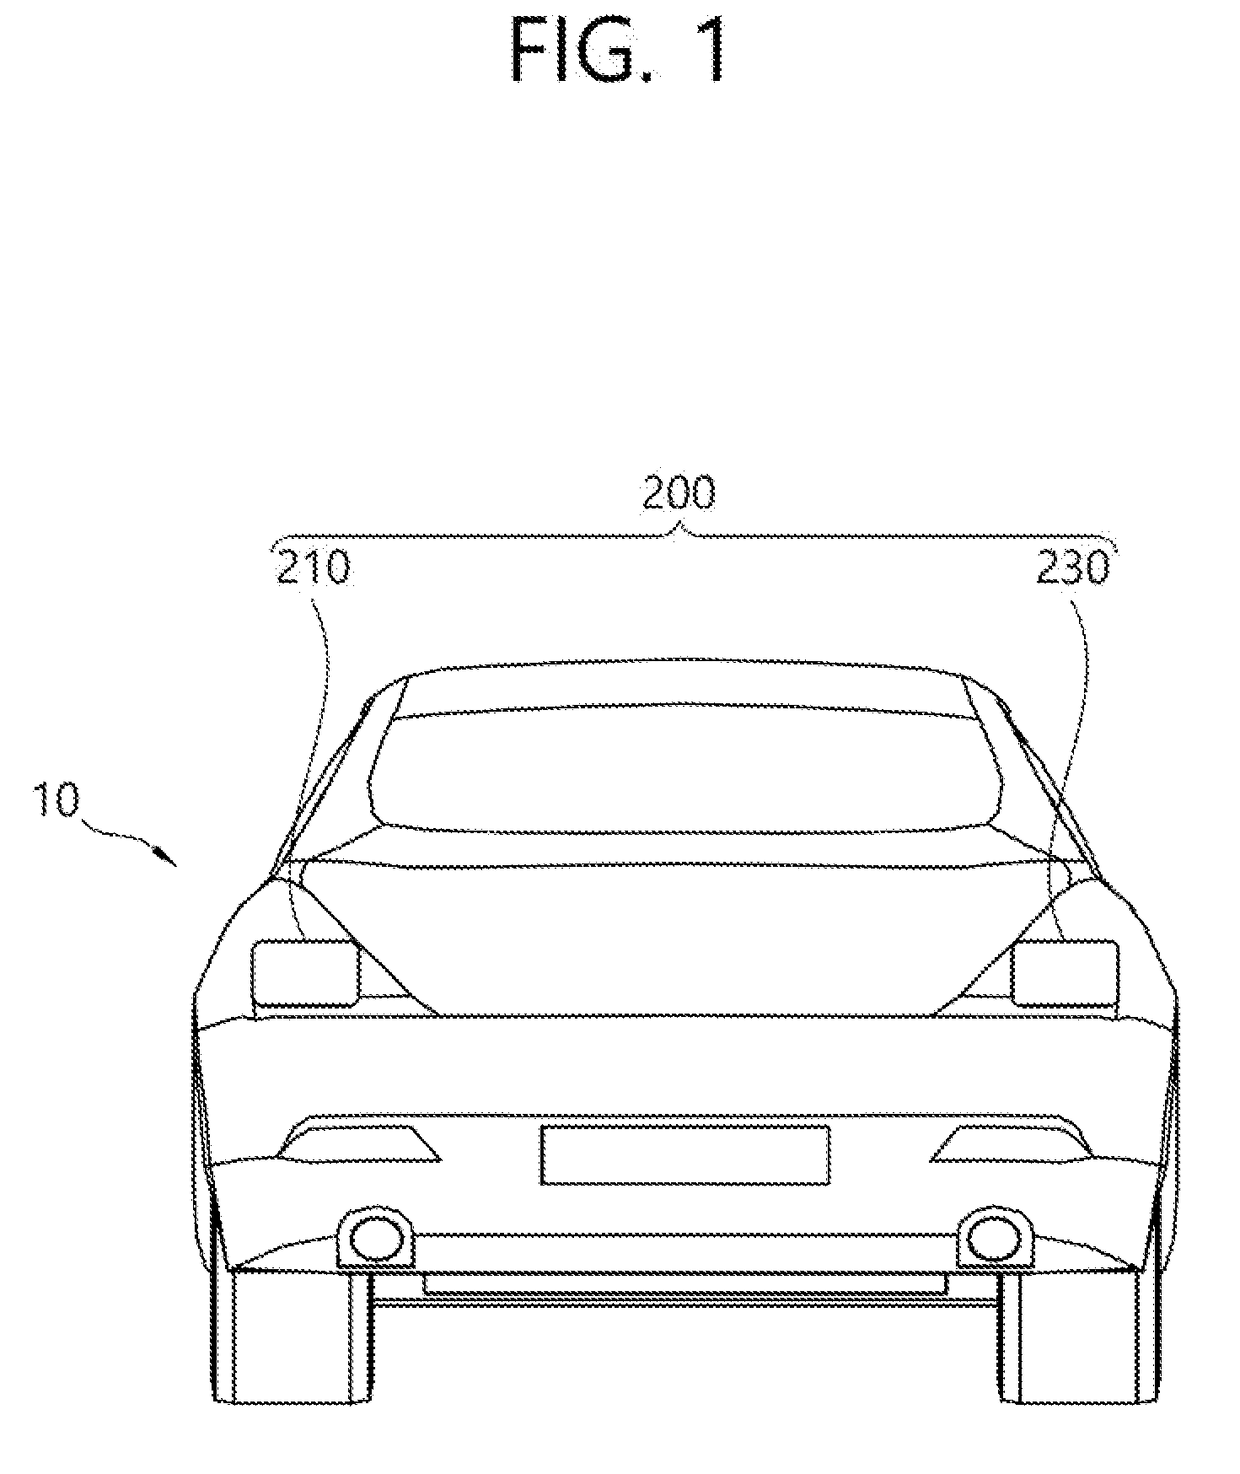 Vehicle taillight system